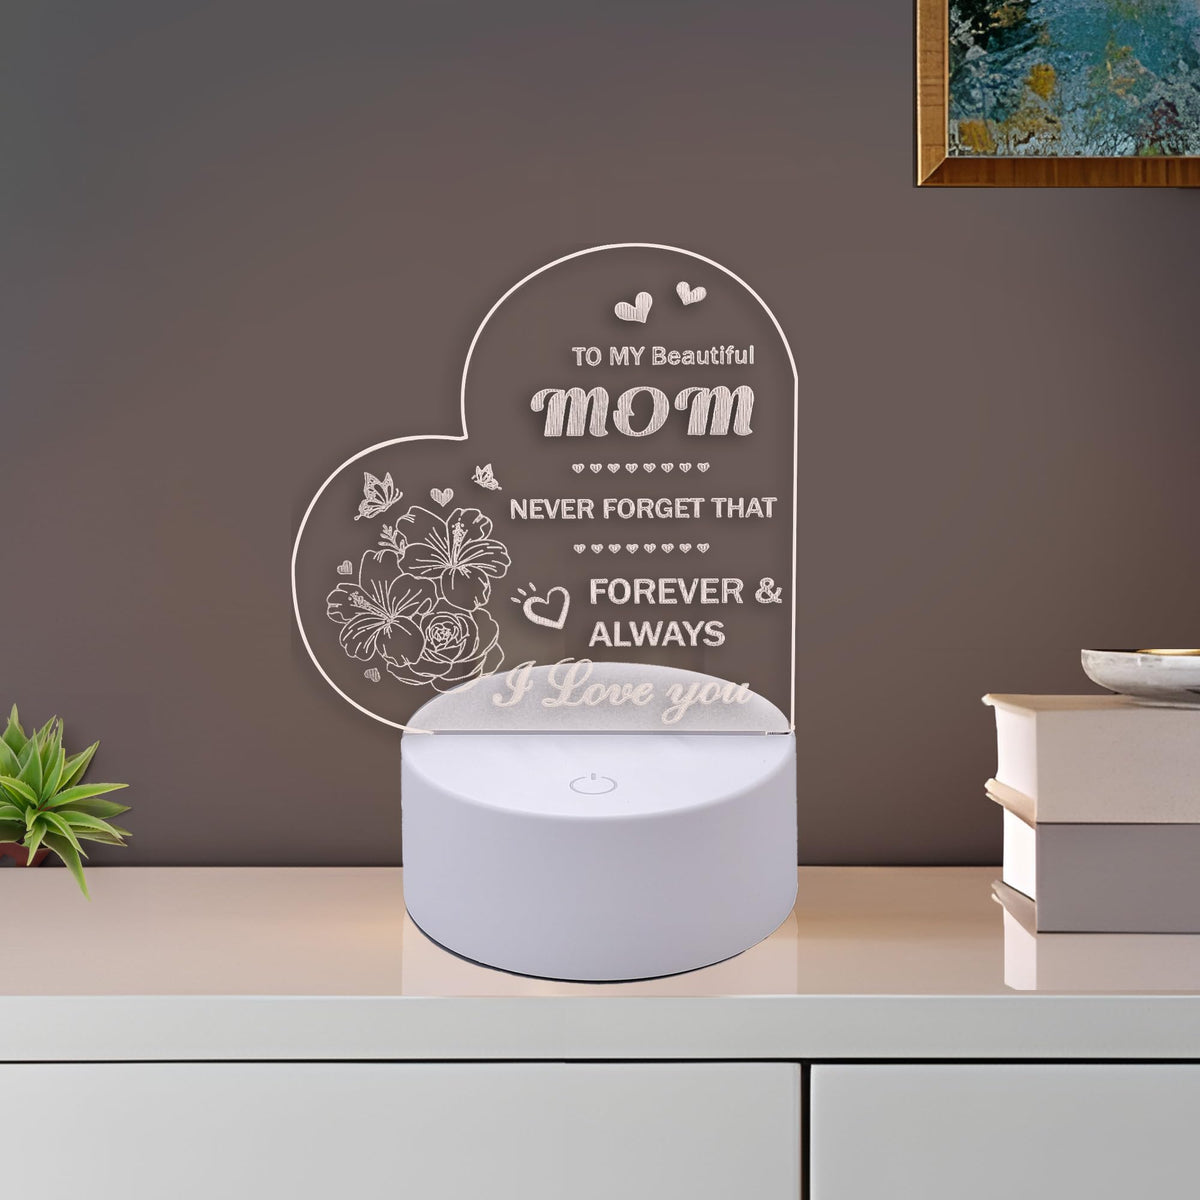 Gleevers Acrylic Plaque with Stand LED Light | Gift For Mother Grandmother | Heart-shaped Engraved Night Light | Mothers Day gift for mom | 1 Pack